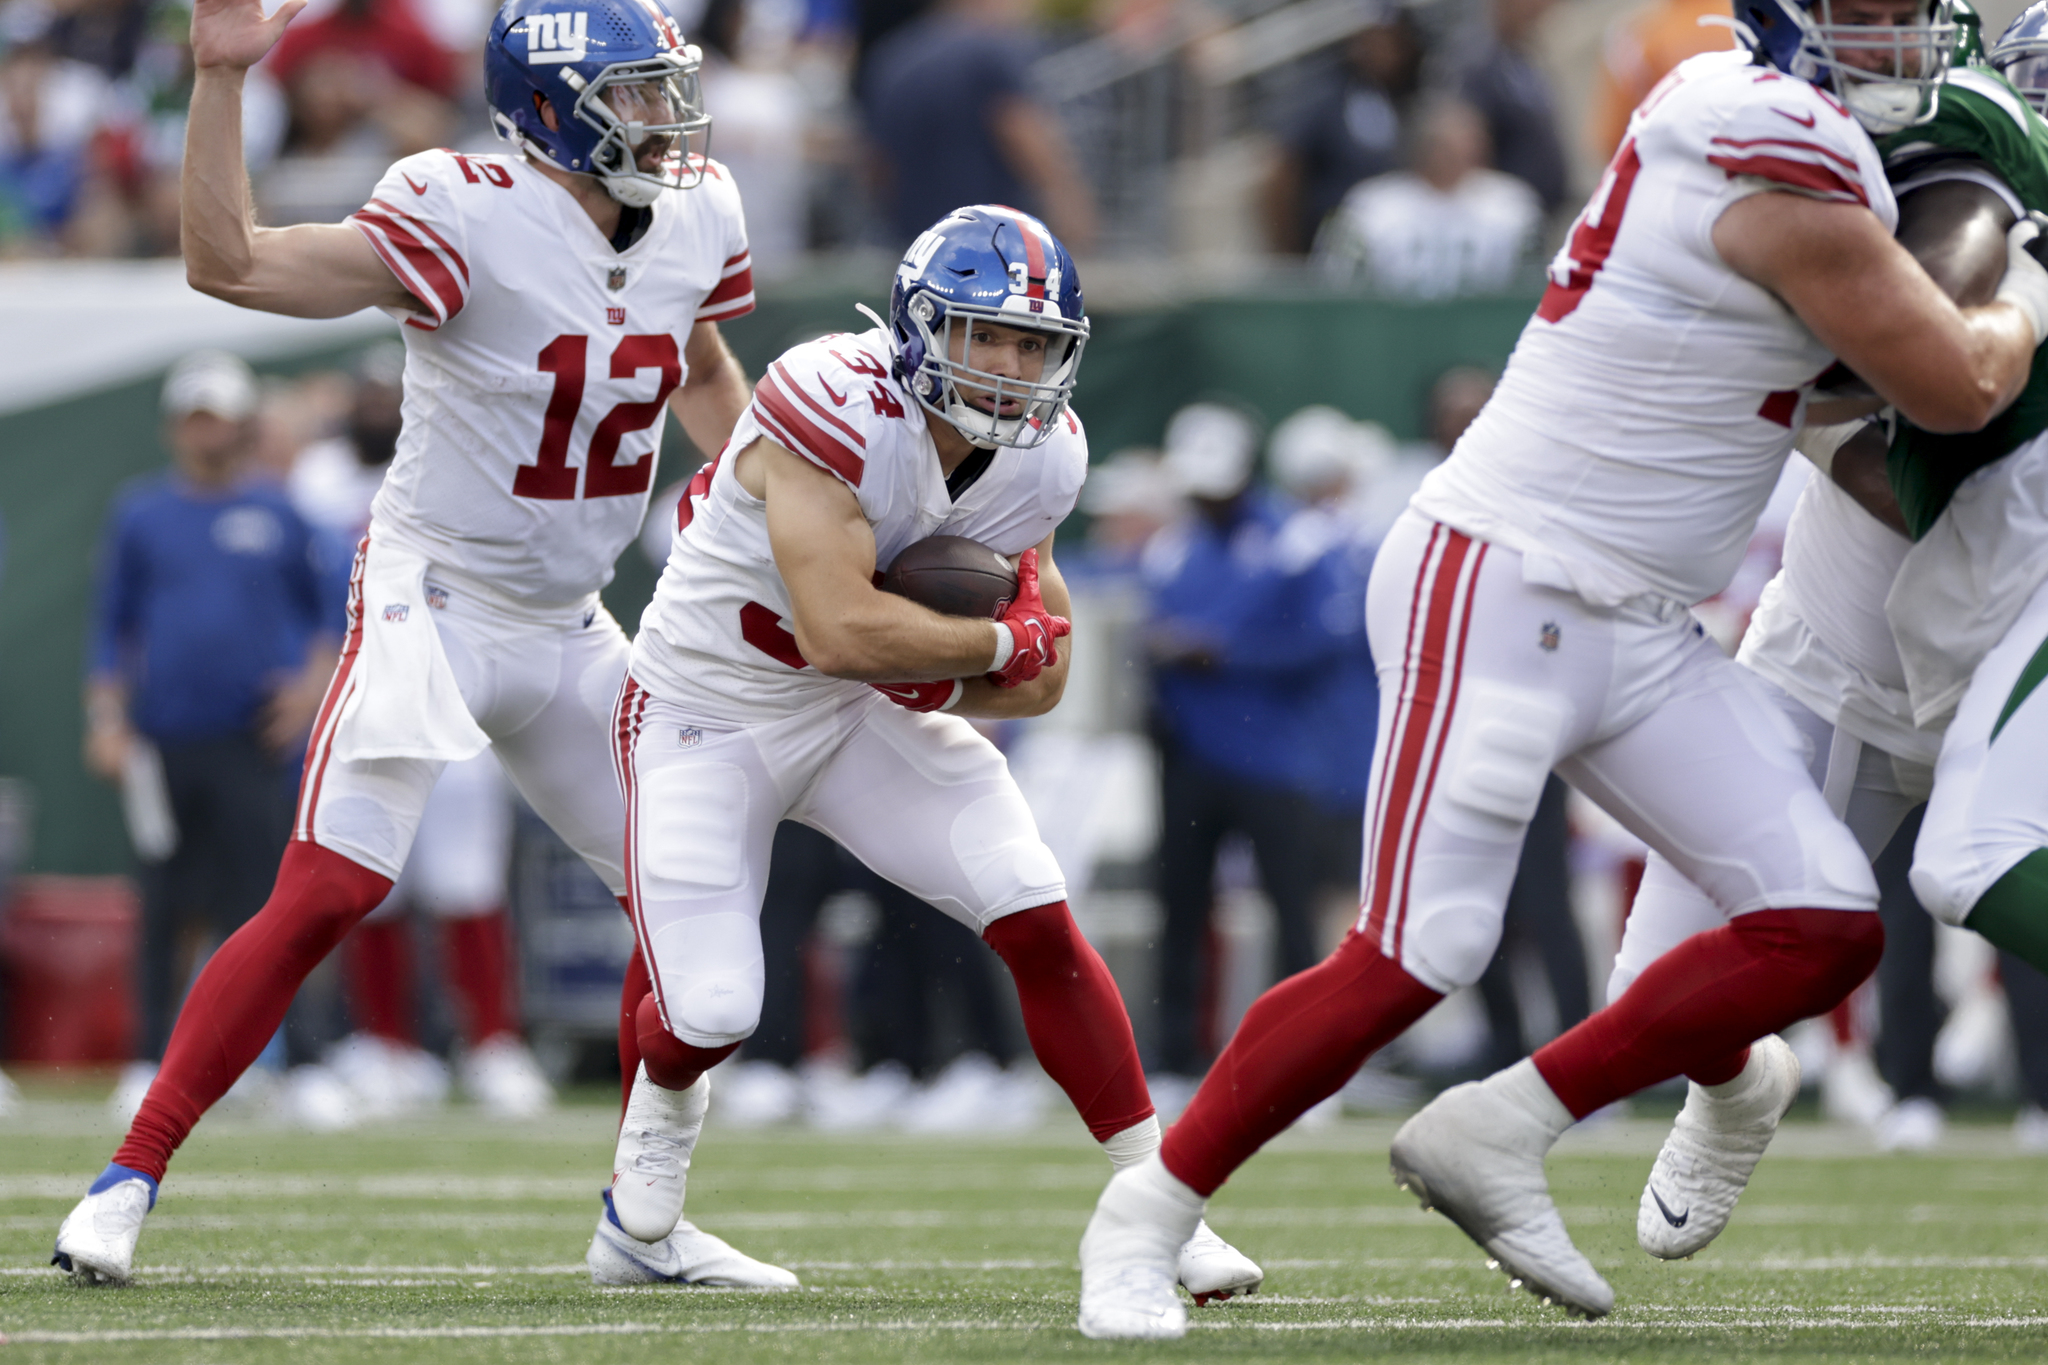 New York Jets - New York Giants: Game time, TV channel and where